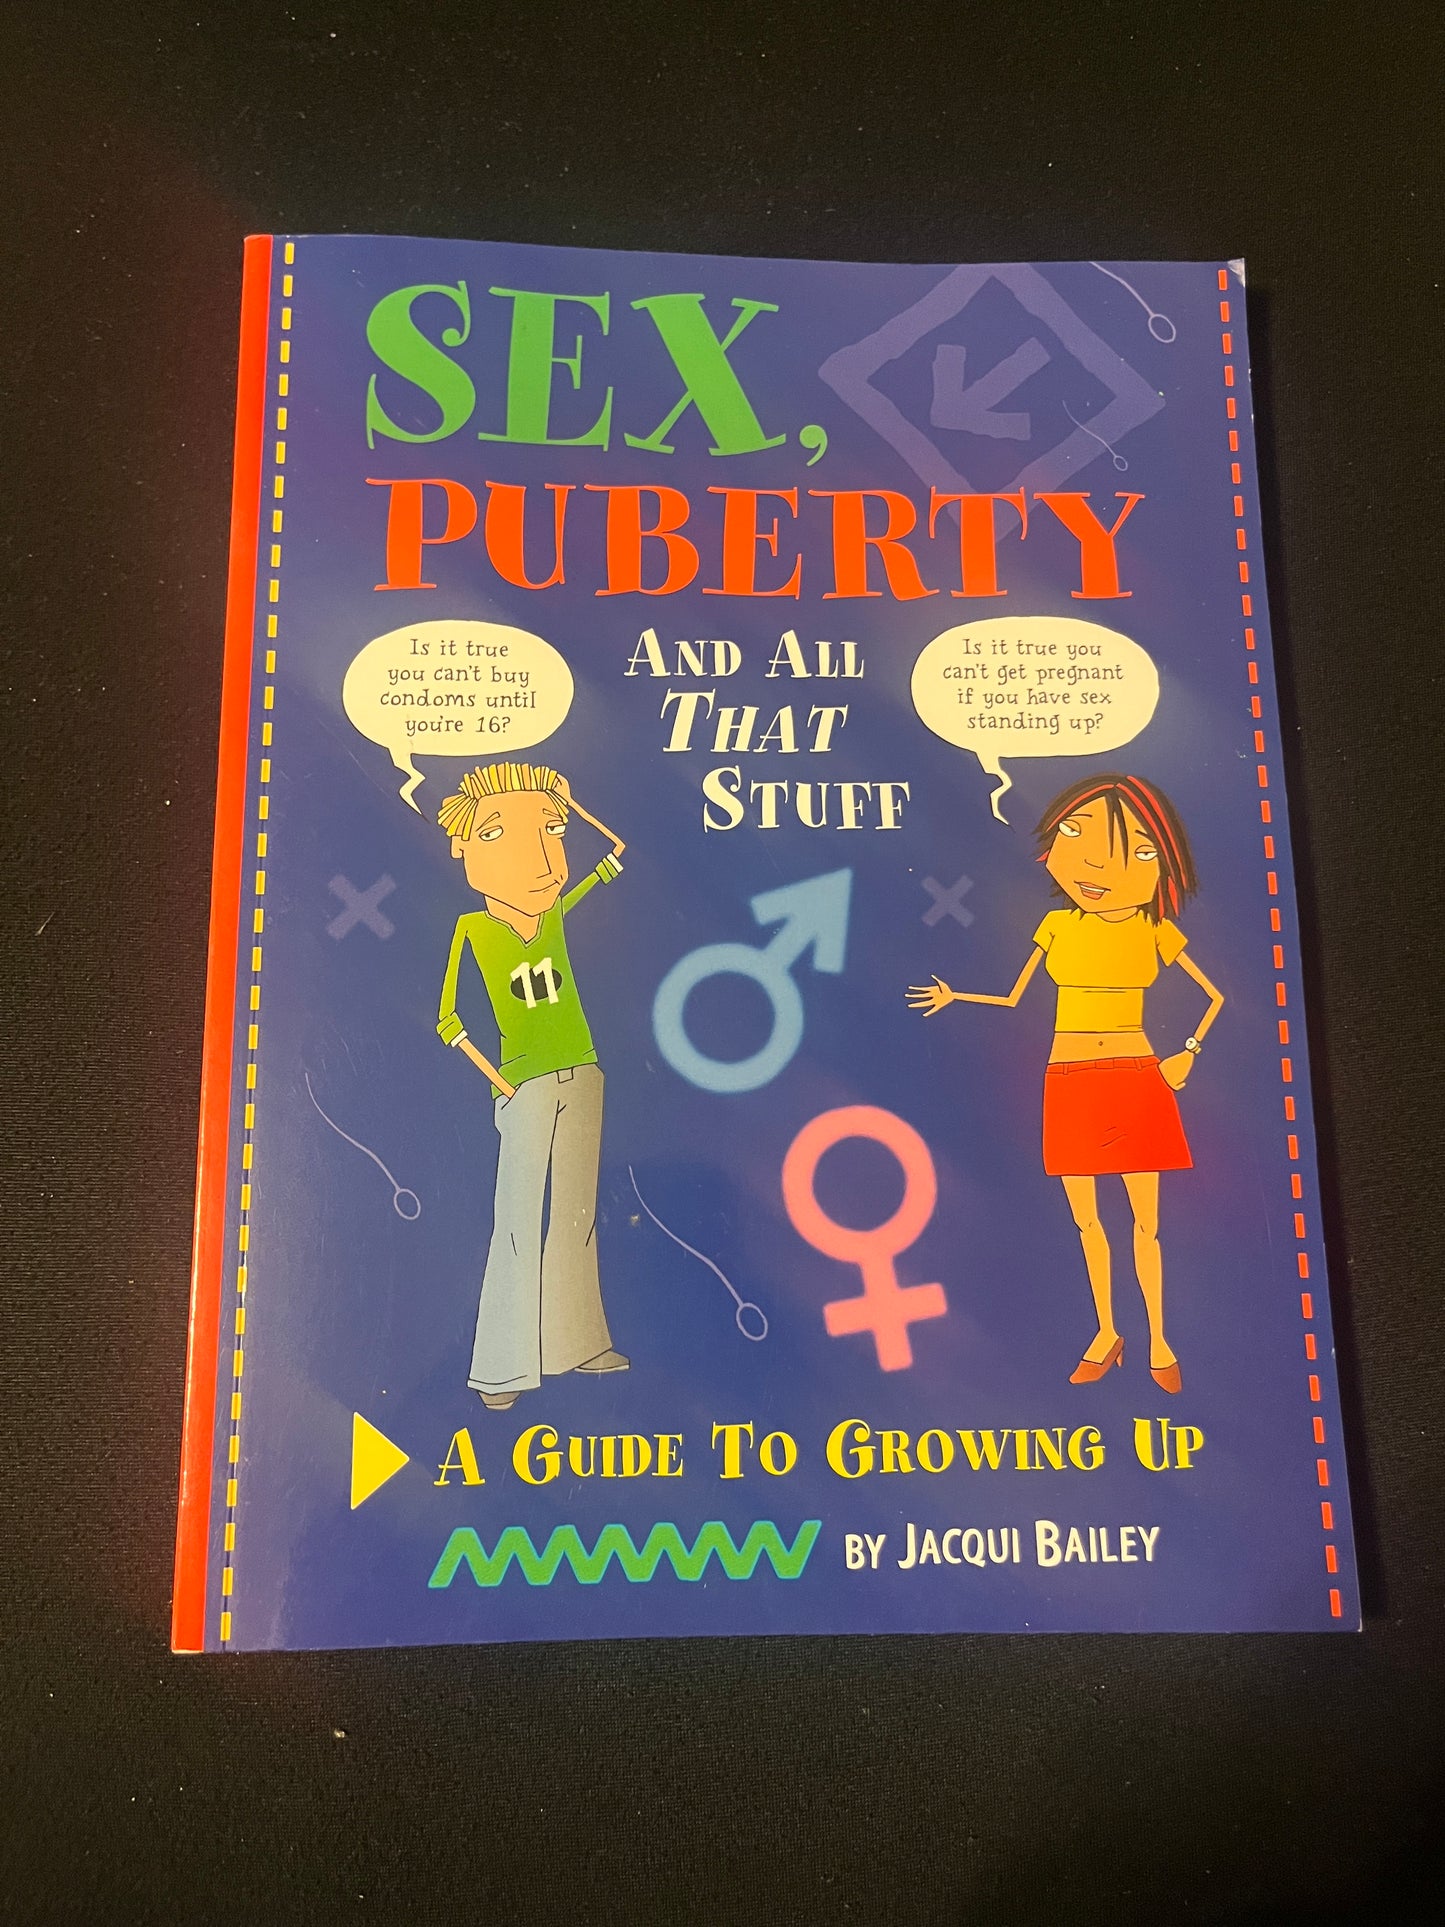 SEX, PUBERTY, AND ALL THAT STUFF: A GUIDE TO GROWING UP by Jacqui Bailey